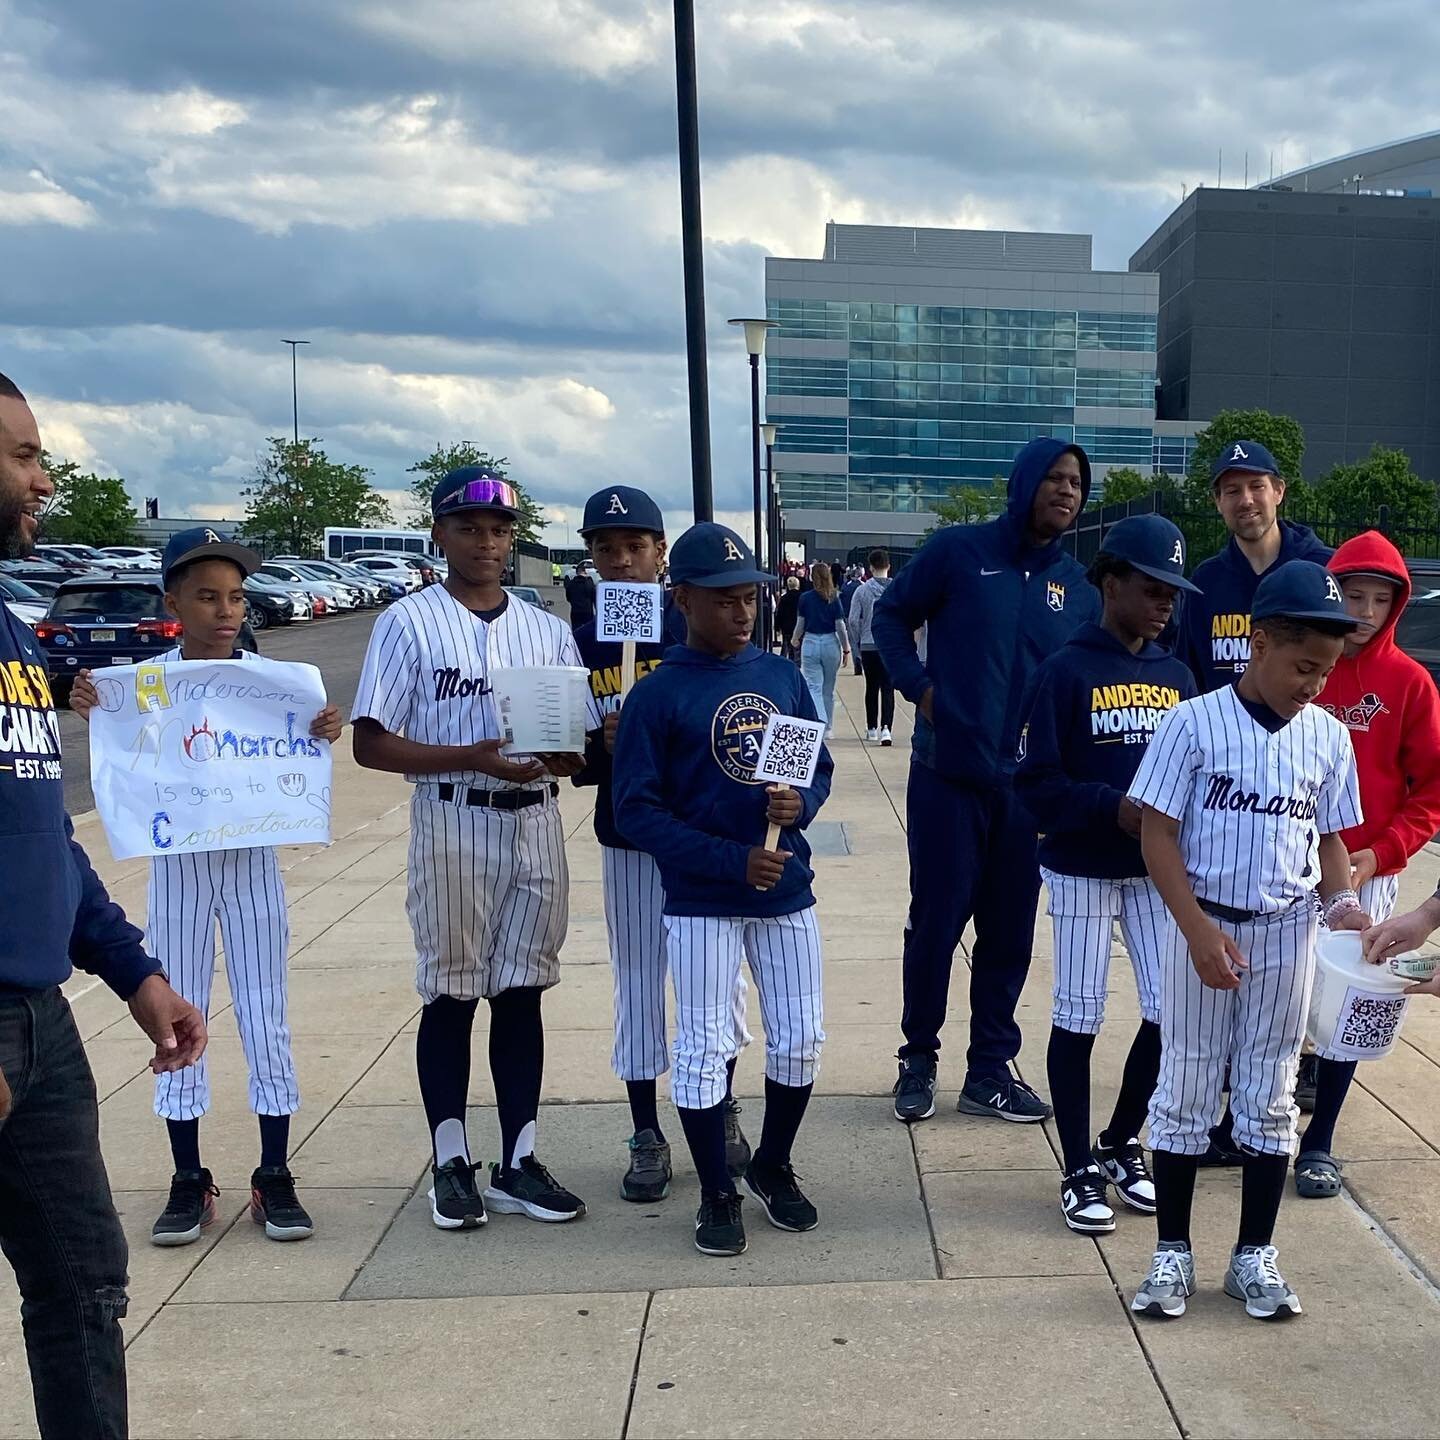 Our 12U Monarchs are at the sports complex tonight raising money for their trip to Cooperstown this summer! Find them and show some love! (Or just hit the link in our bio)

Go Phillies! Go Sixers! Go back to Boston!

#sixers #phillies #baseball #bask